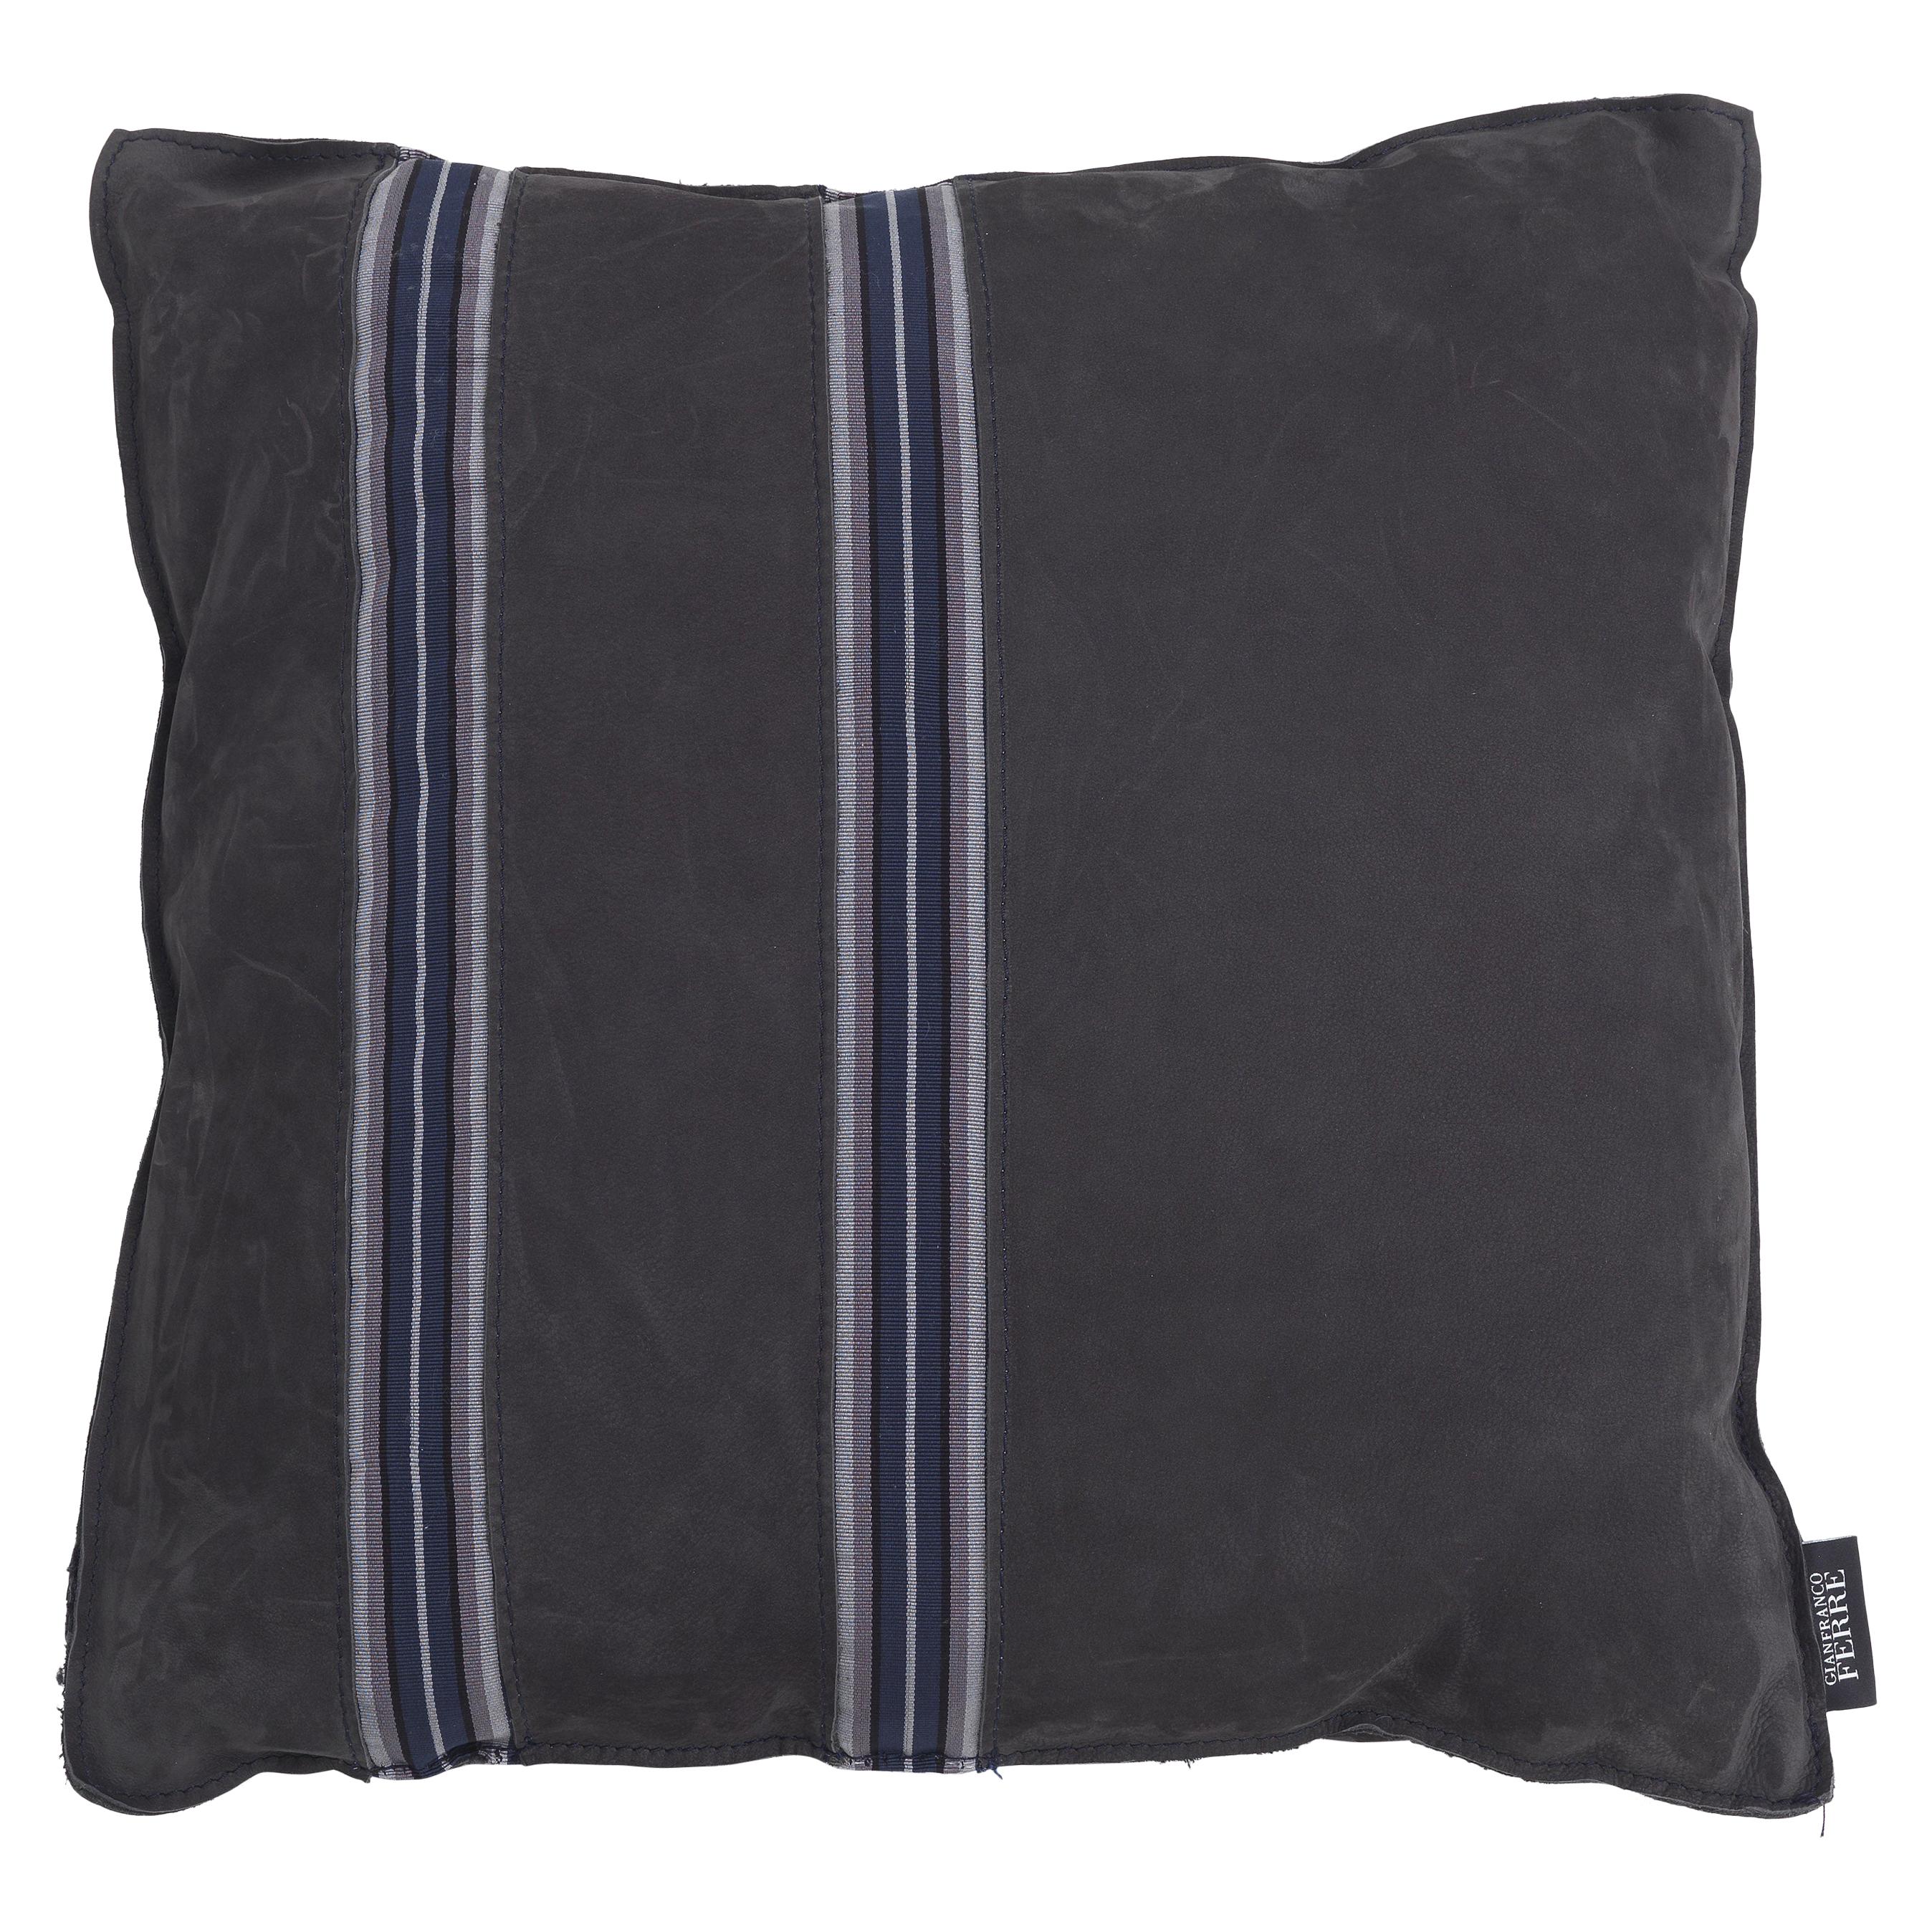 21st Century Road_2 Decorative Cushion with Leather by Gianfranco Ferré Home